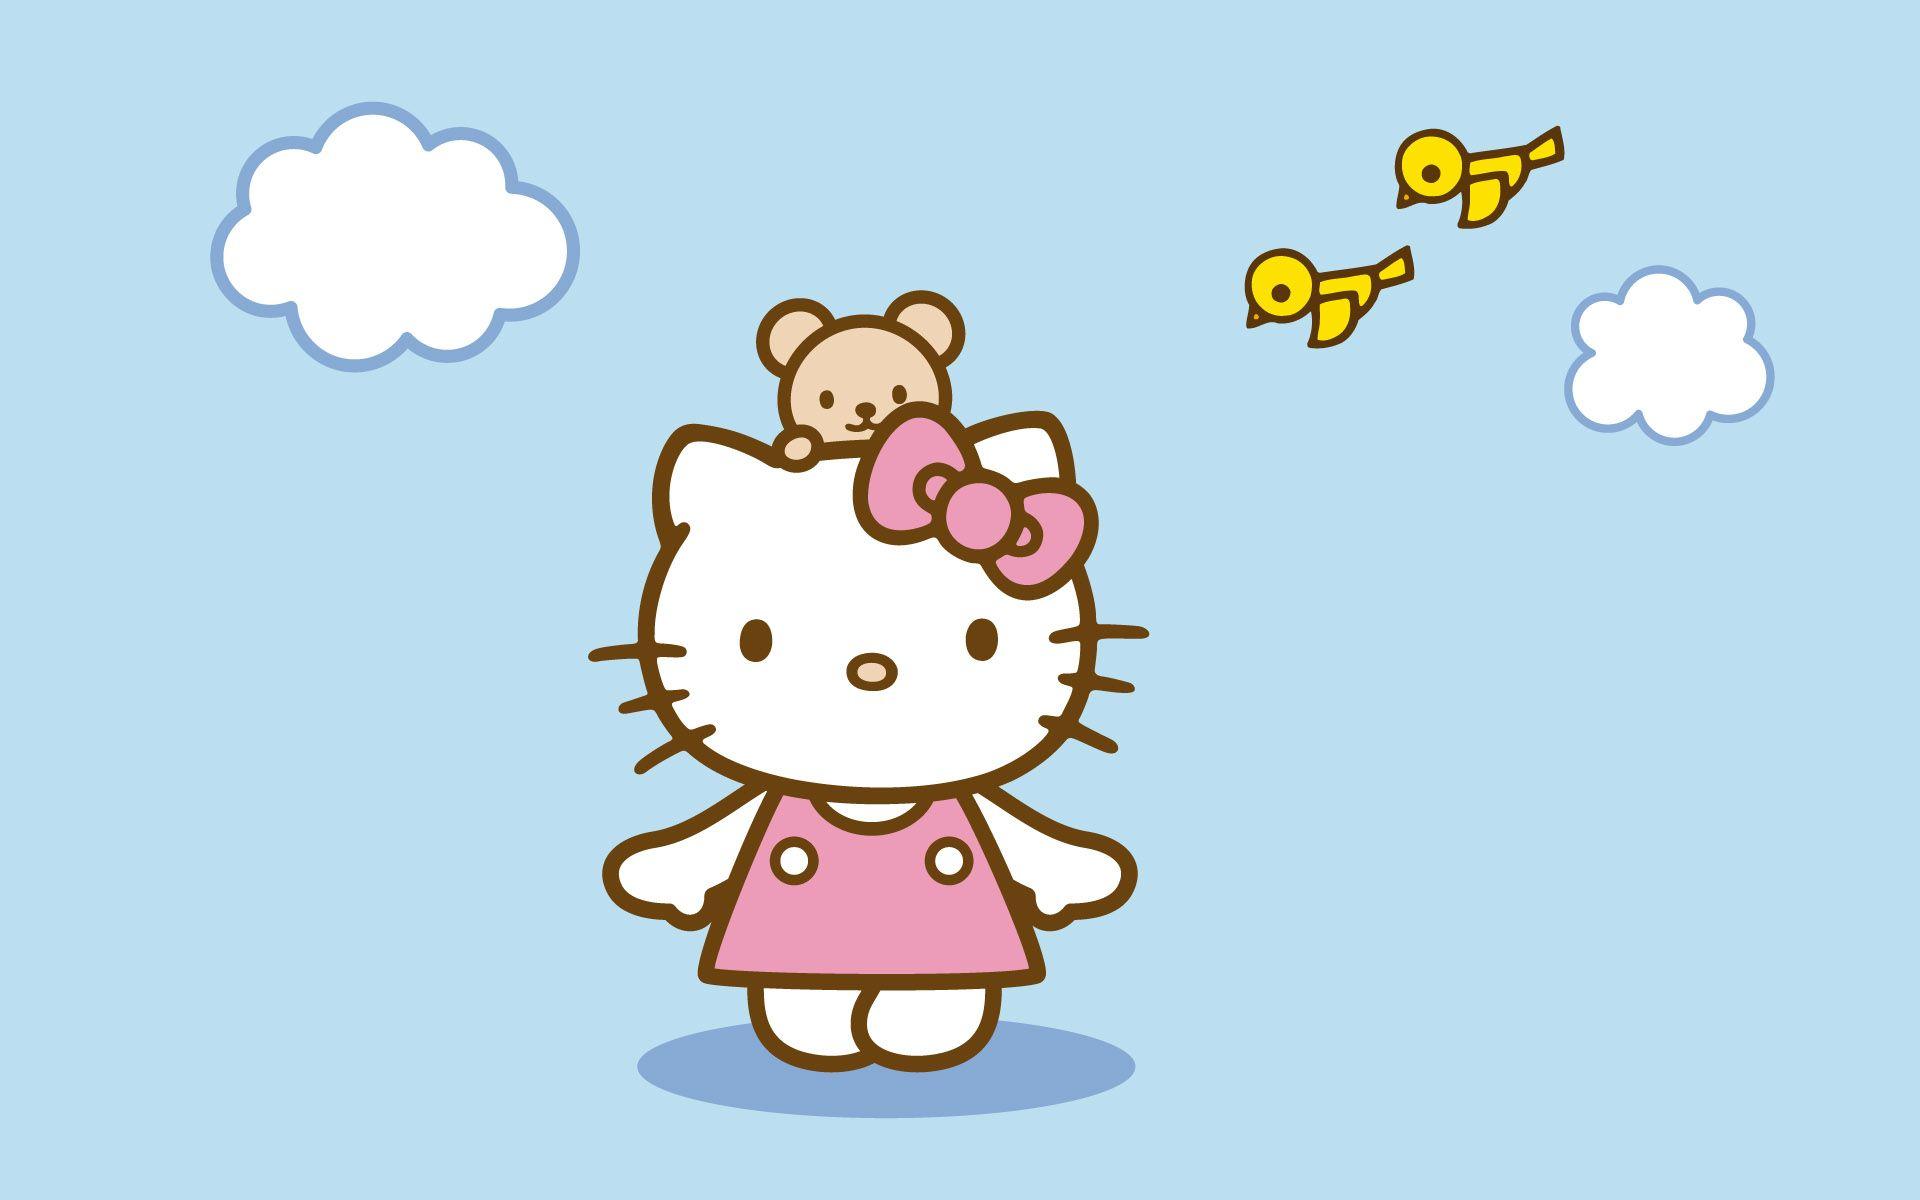 Cute Hello Kitty Backgrounds